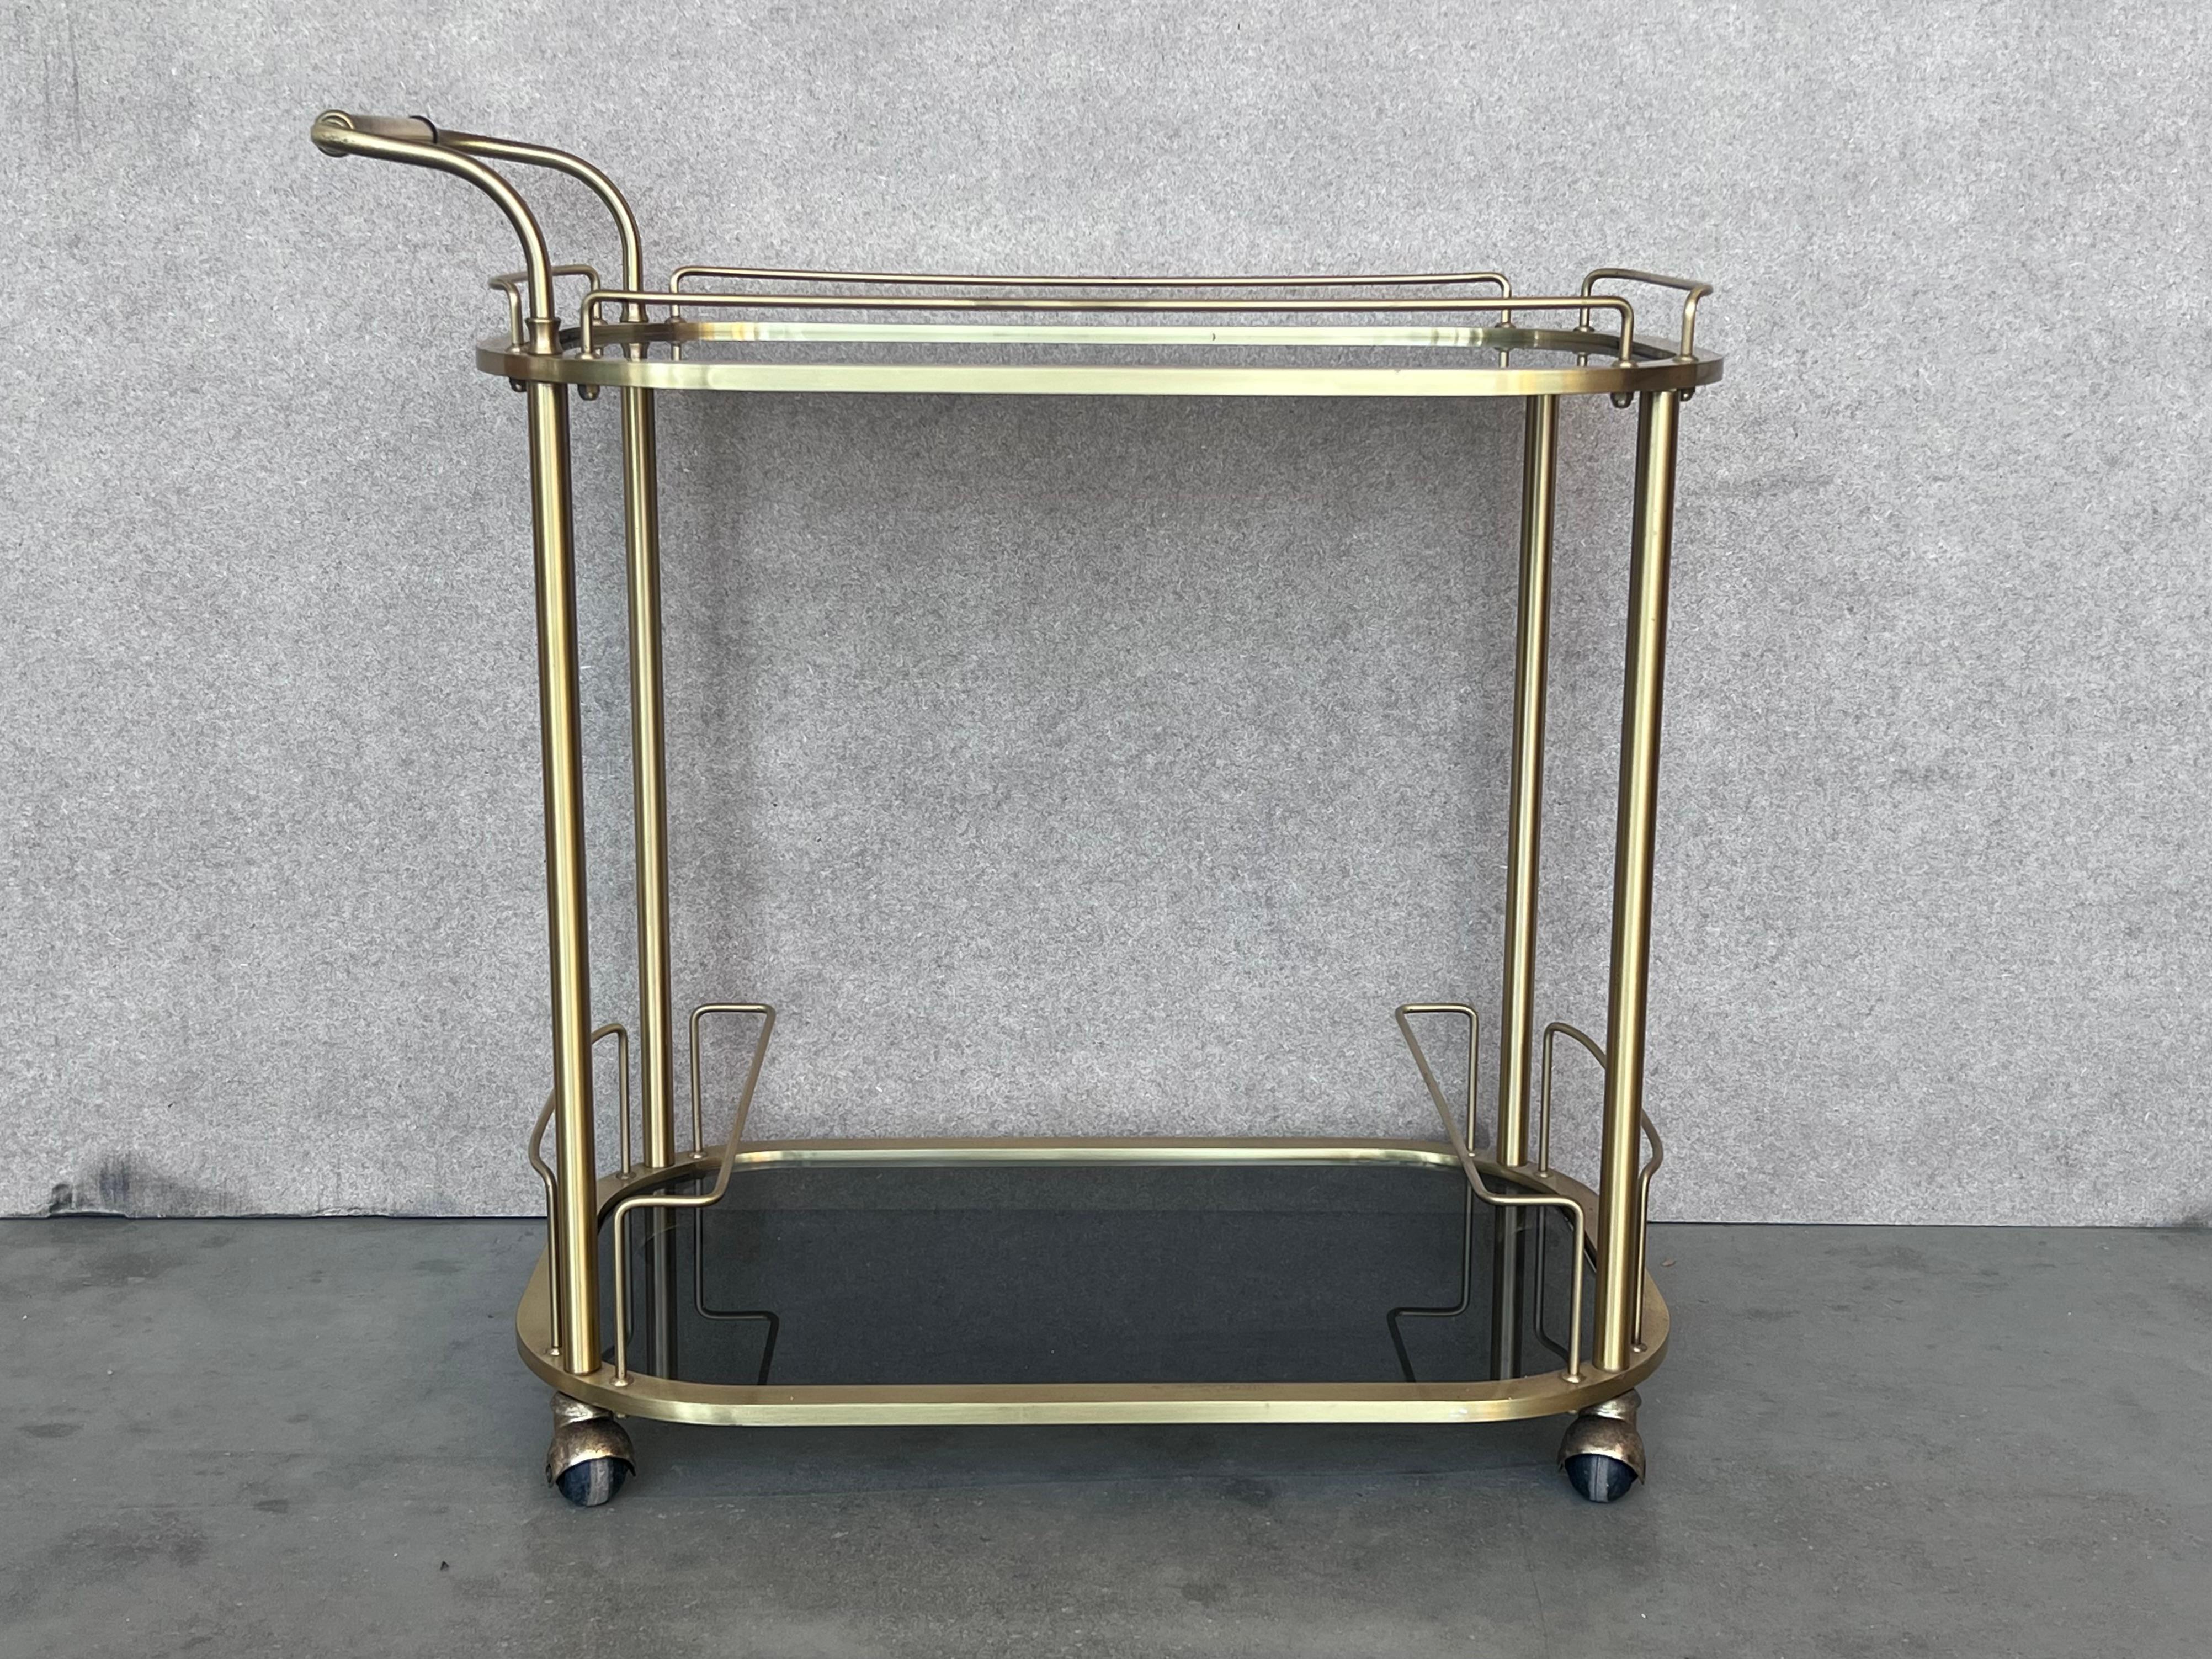 Fabulous brass bar cart with smoked glass
Proudly showcase your finest decanters and stemware! Brass handle. 
 This piece is in very good original condition and shows it was well cared for.